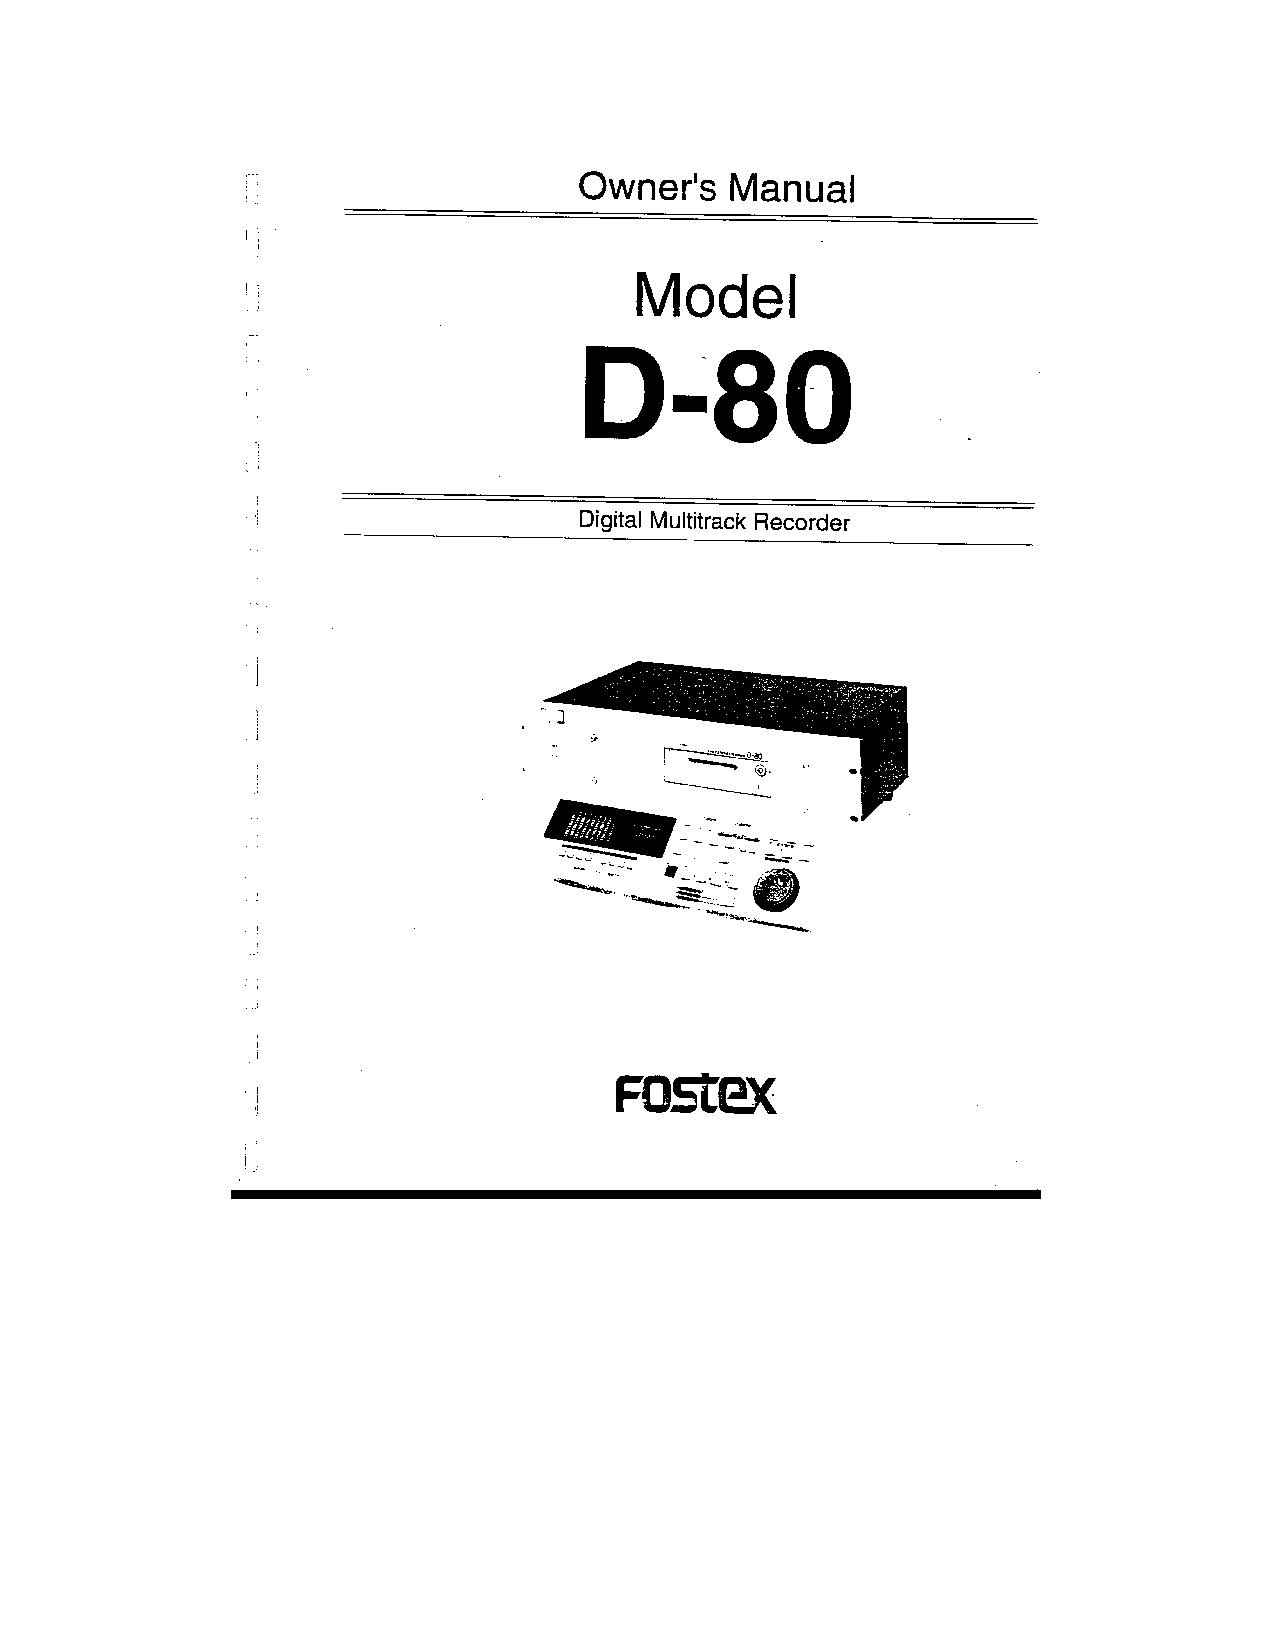 Fostex D-80 Owners Manual